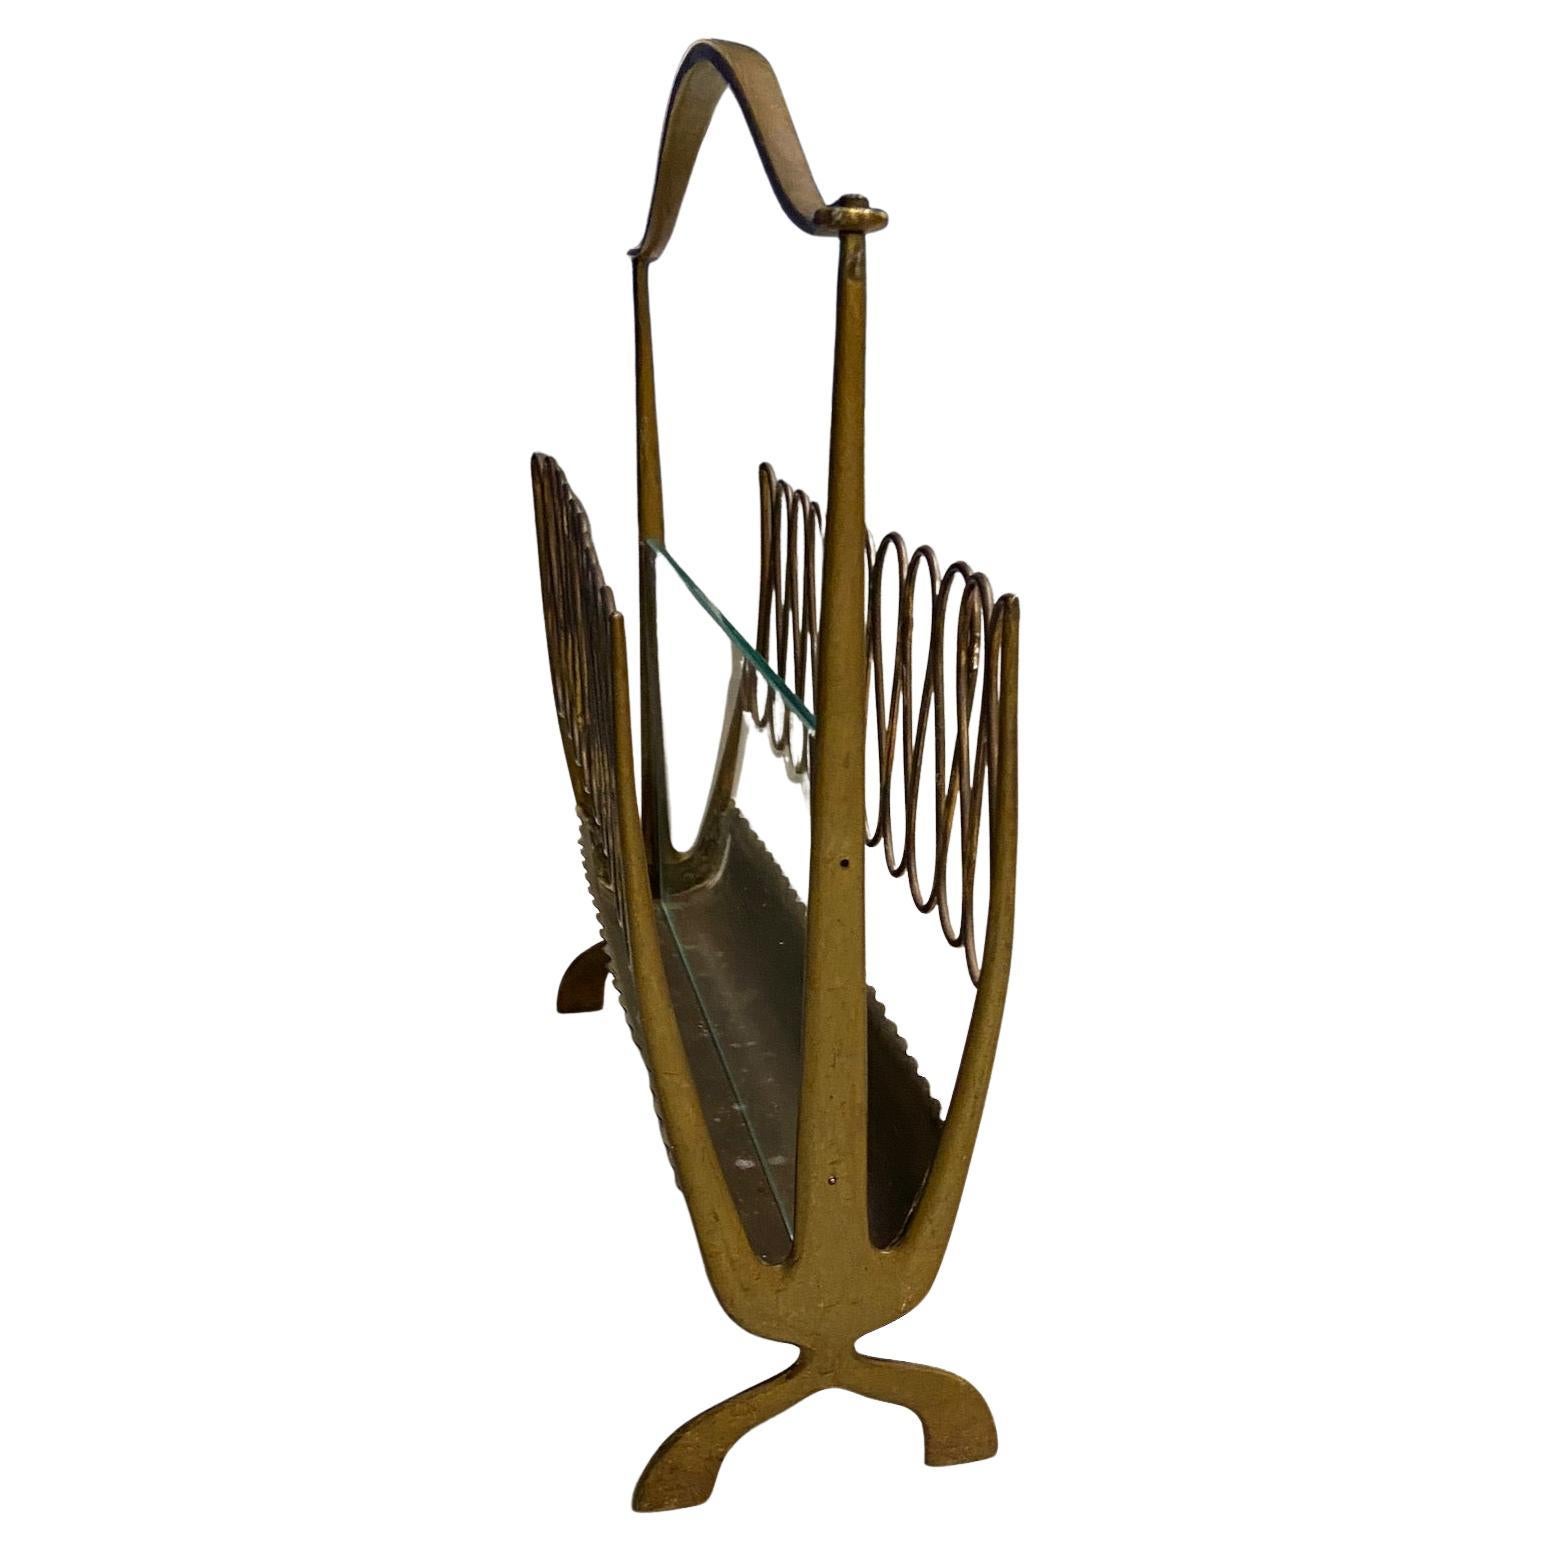 Midcentury magazine rack in the style of Gio Ponti, brass and glass, unpolished.